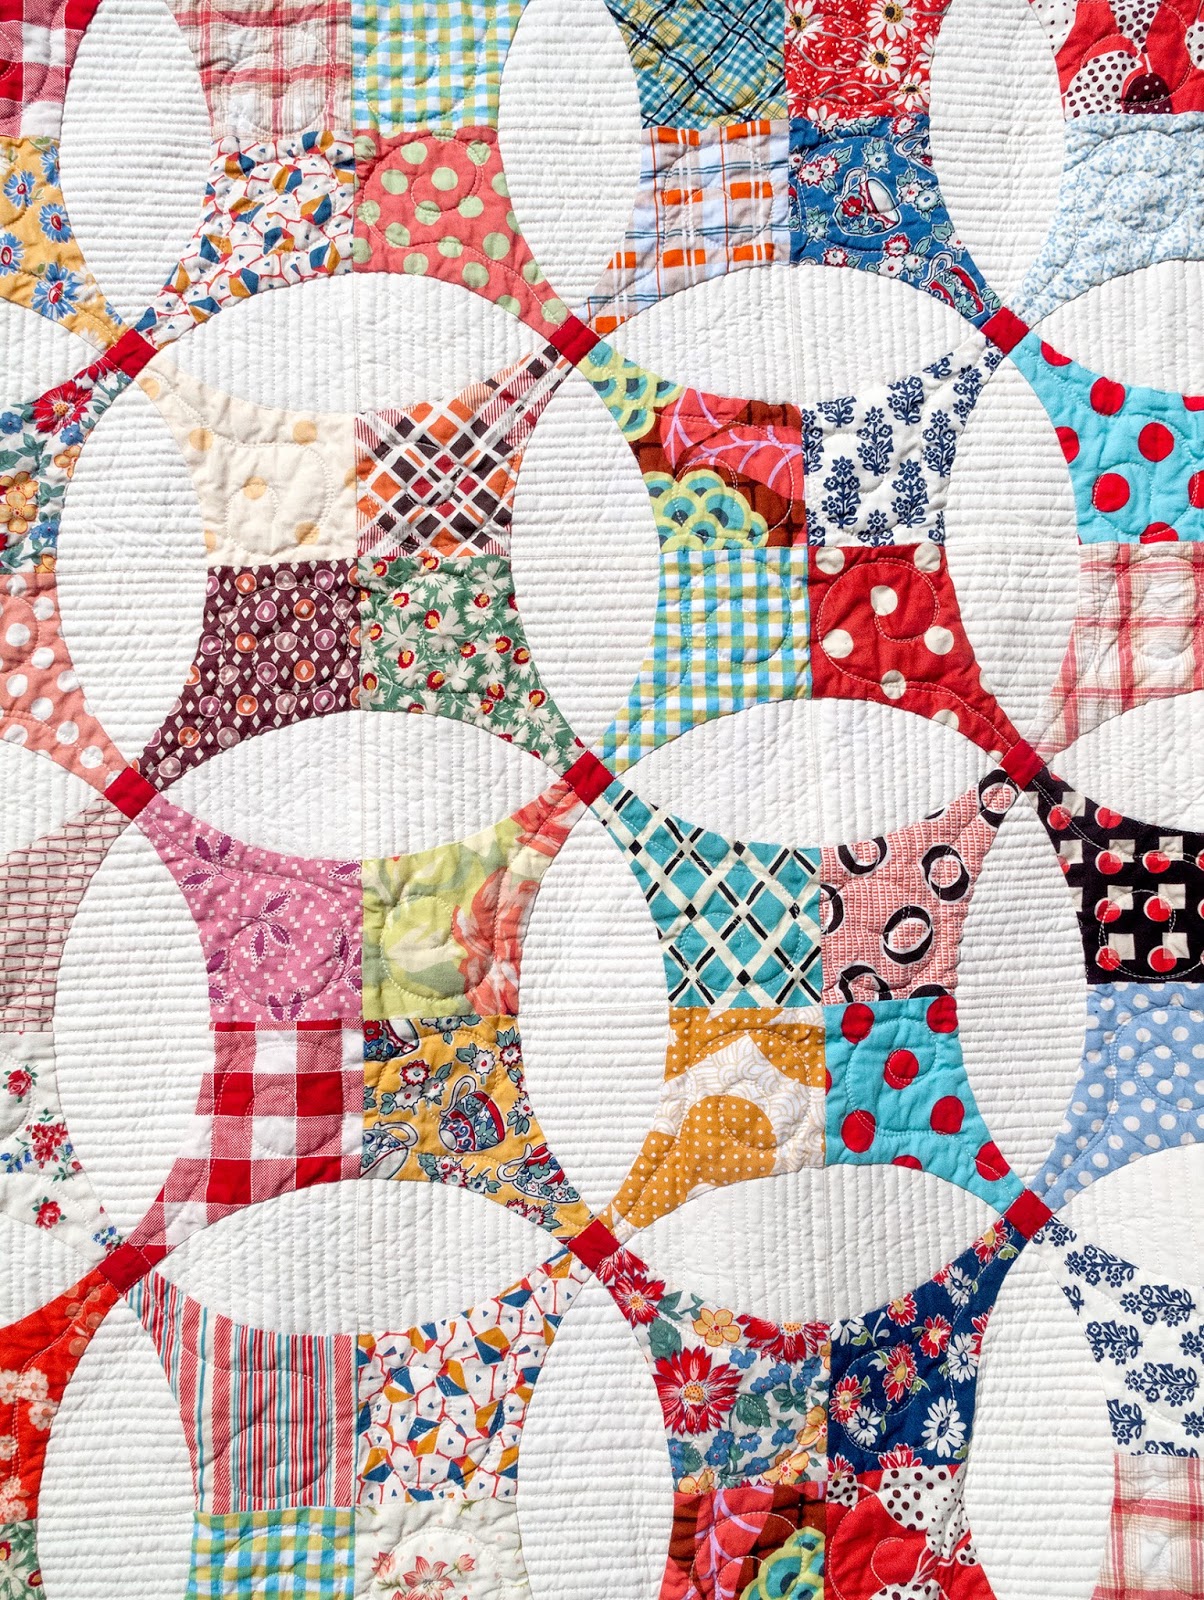 nifty quilts: Flowering Snowball is Quilted!